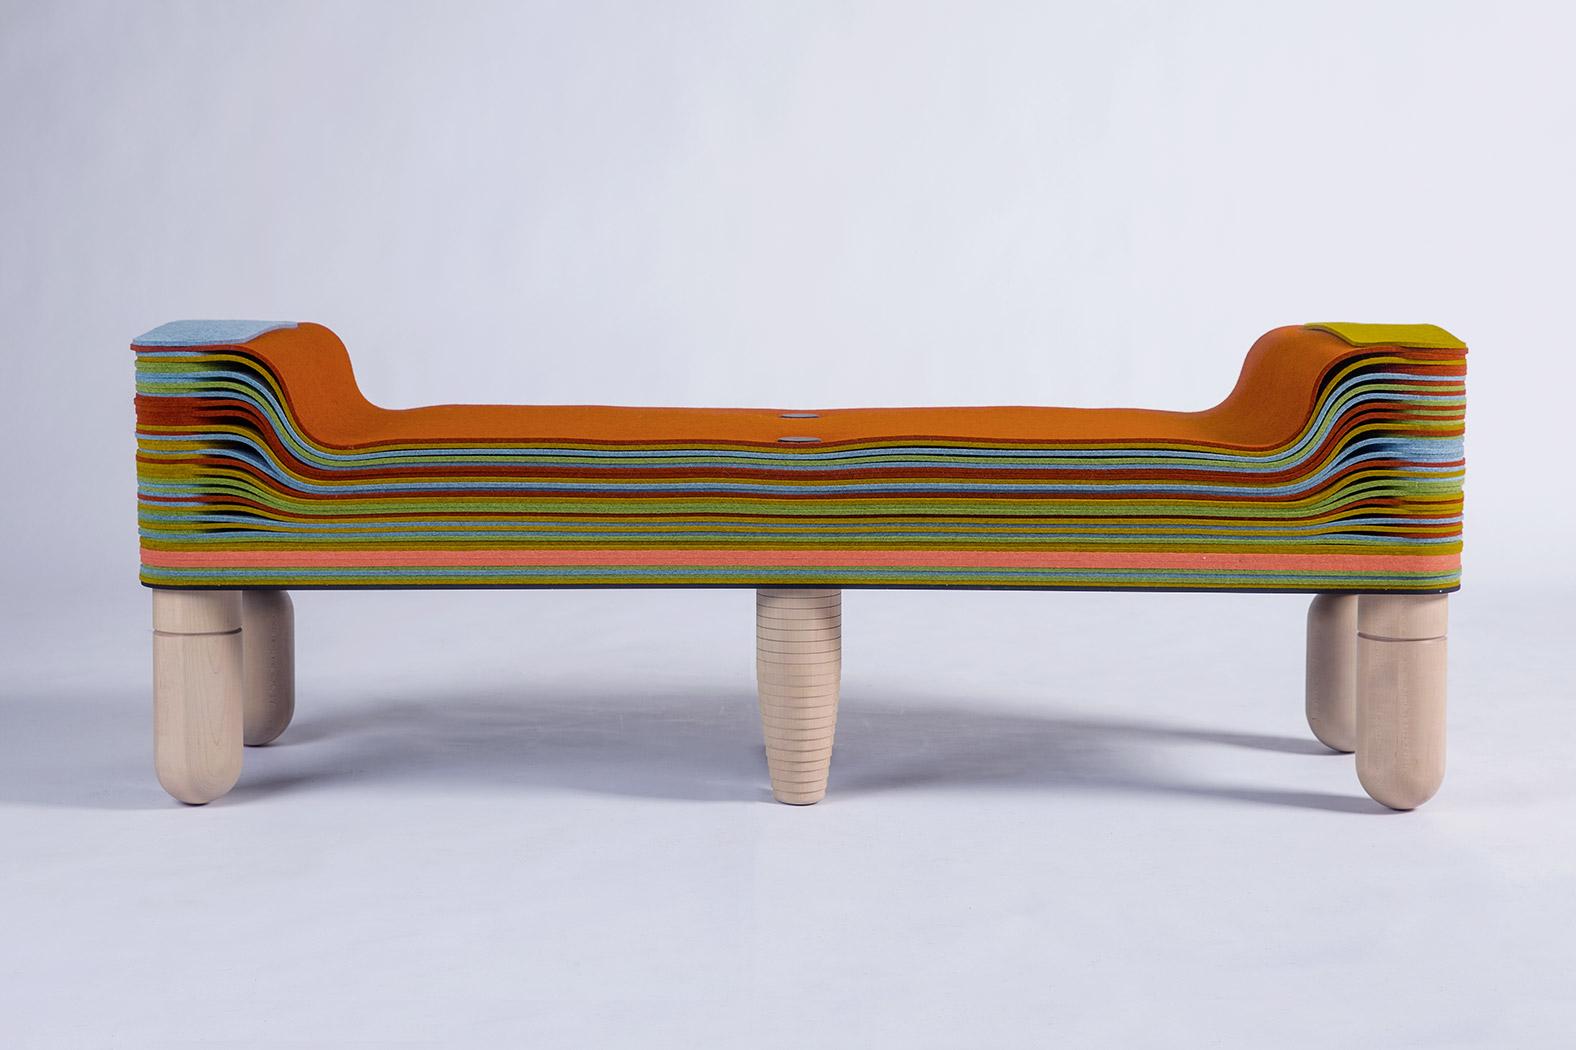 Maxine C, Felt and Wood Bench, Benoist F. Drut in Stackabl, Canada 2021 For Sale 3